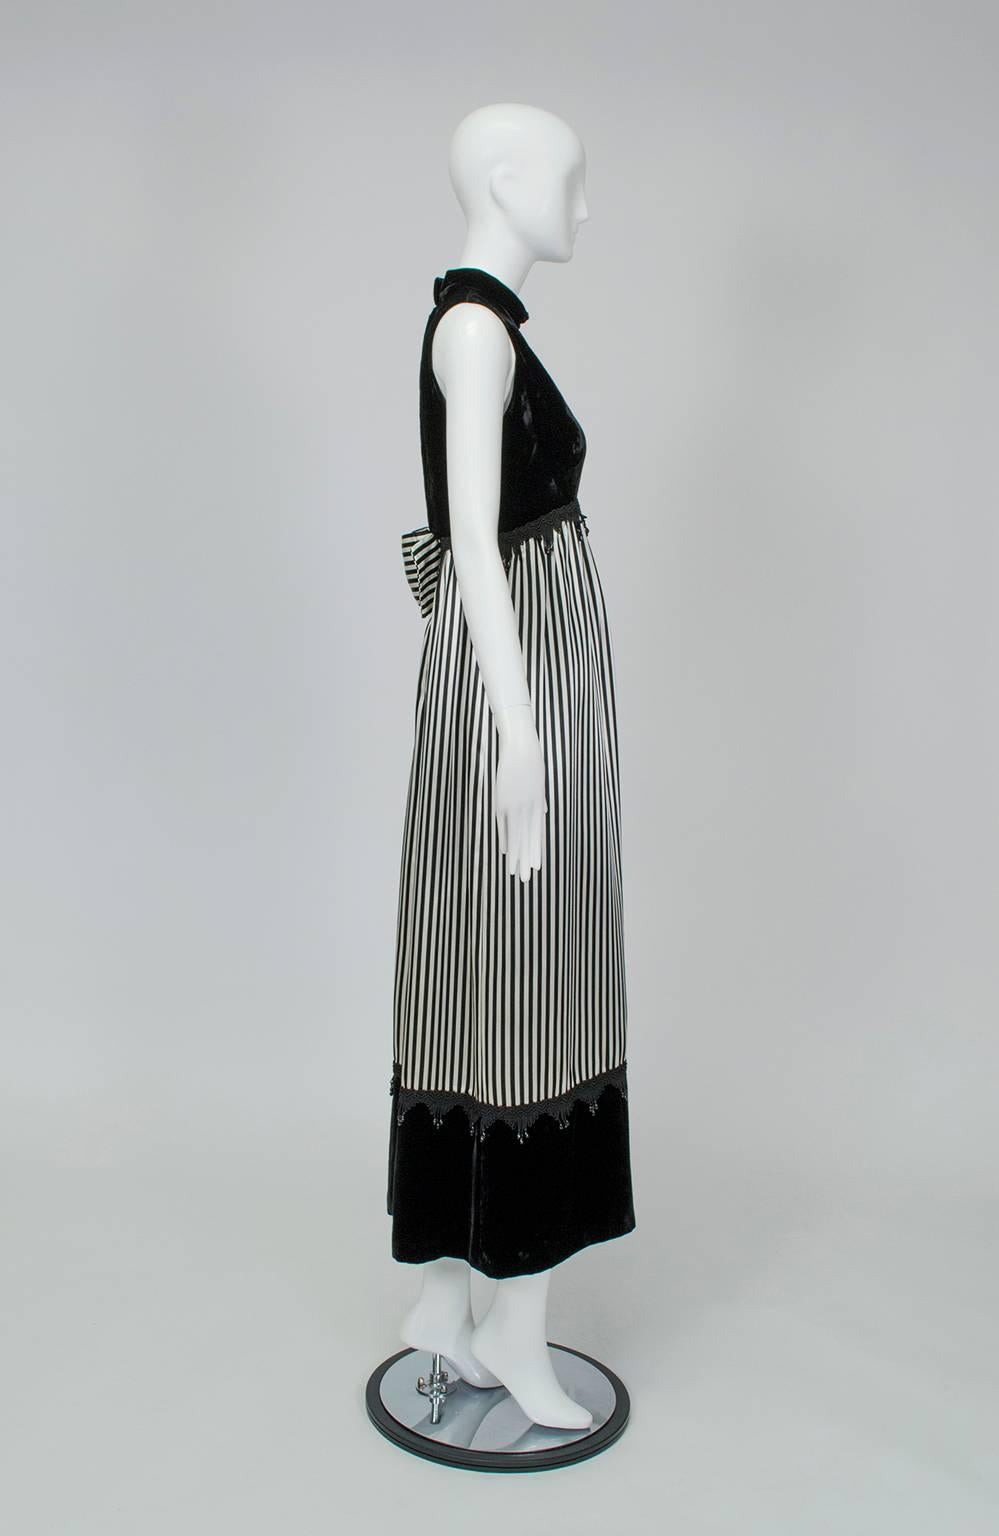 With multiple textures, hanging beadwork and a riot of ¼” stripes, this gown has a lot going on but manages to get all of it just right. Best on a statuesque figure with sculpted shoulders, this gown reminds us of a piece that might be worn on a